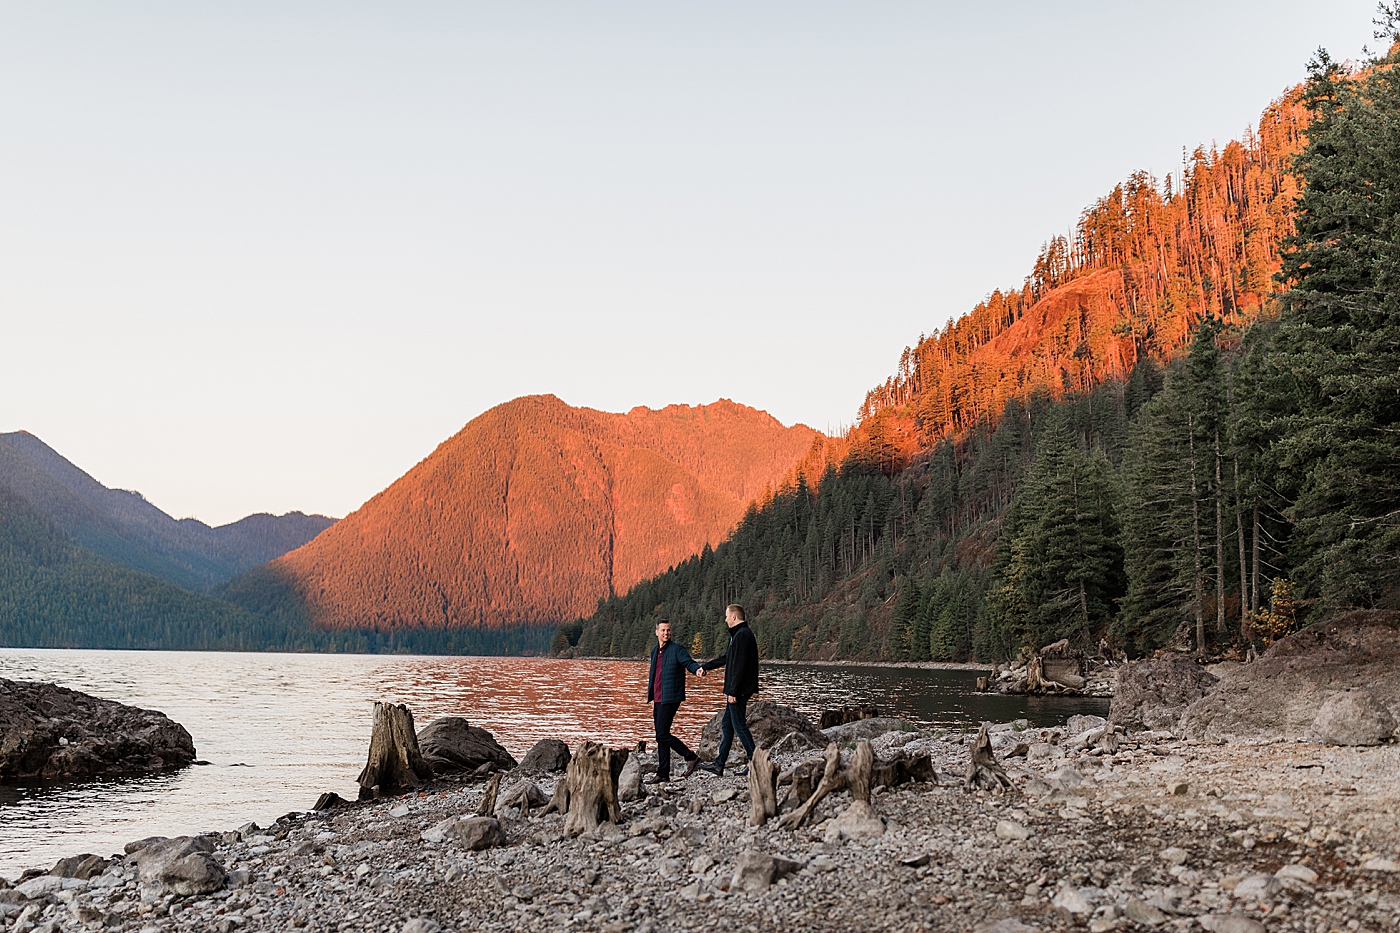 Couple walking along the rocks/water at engagement session. Photo by Megan Montalvo Photography.